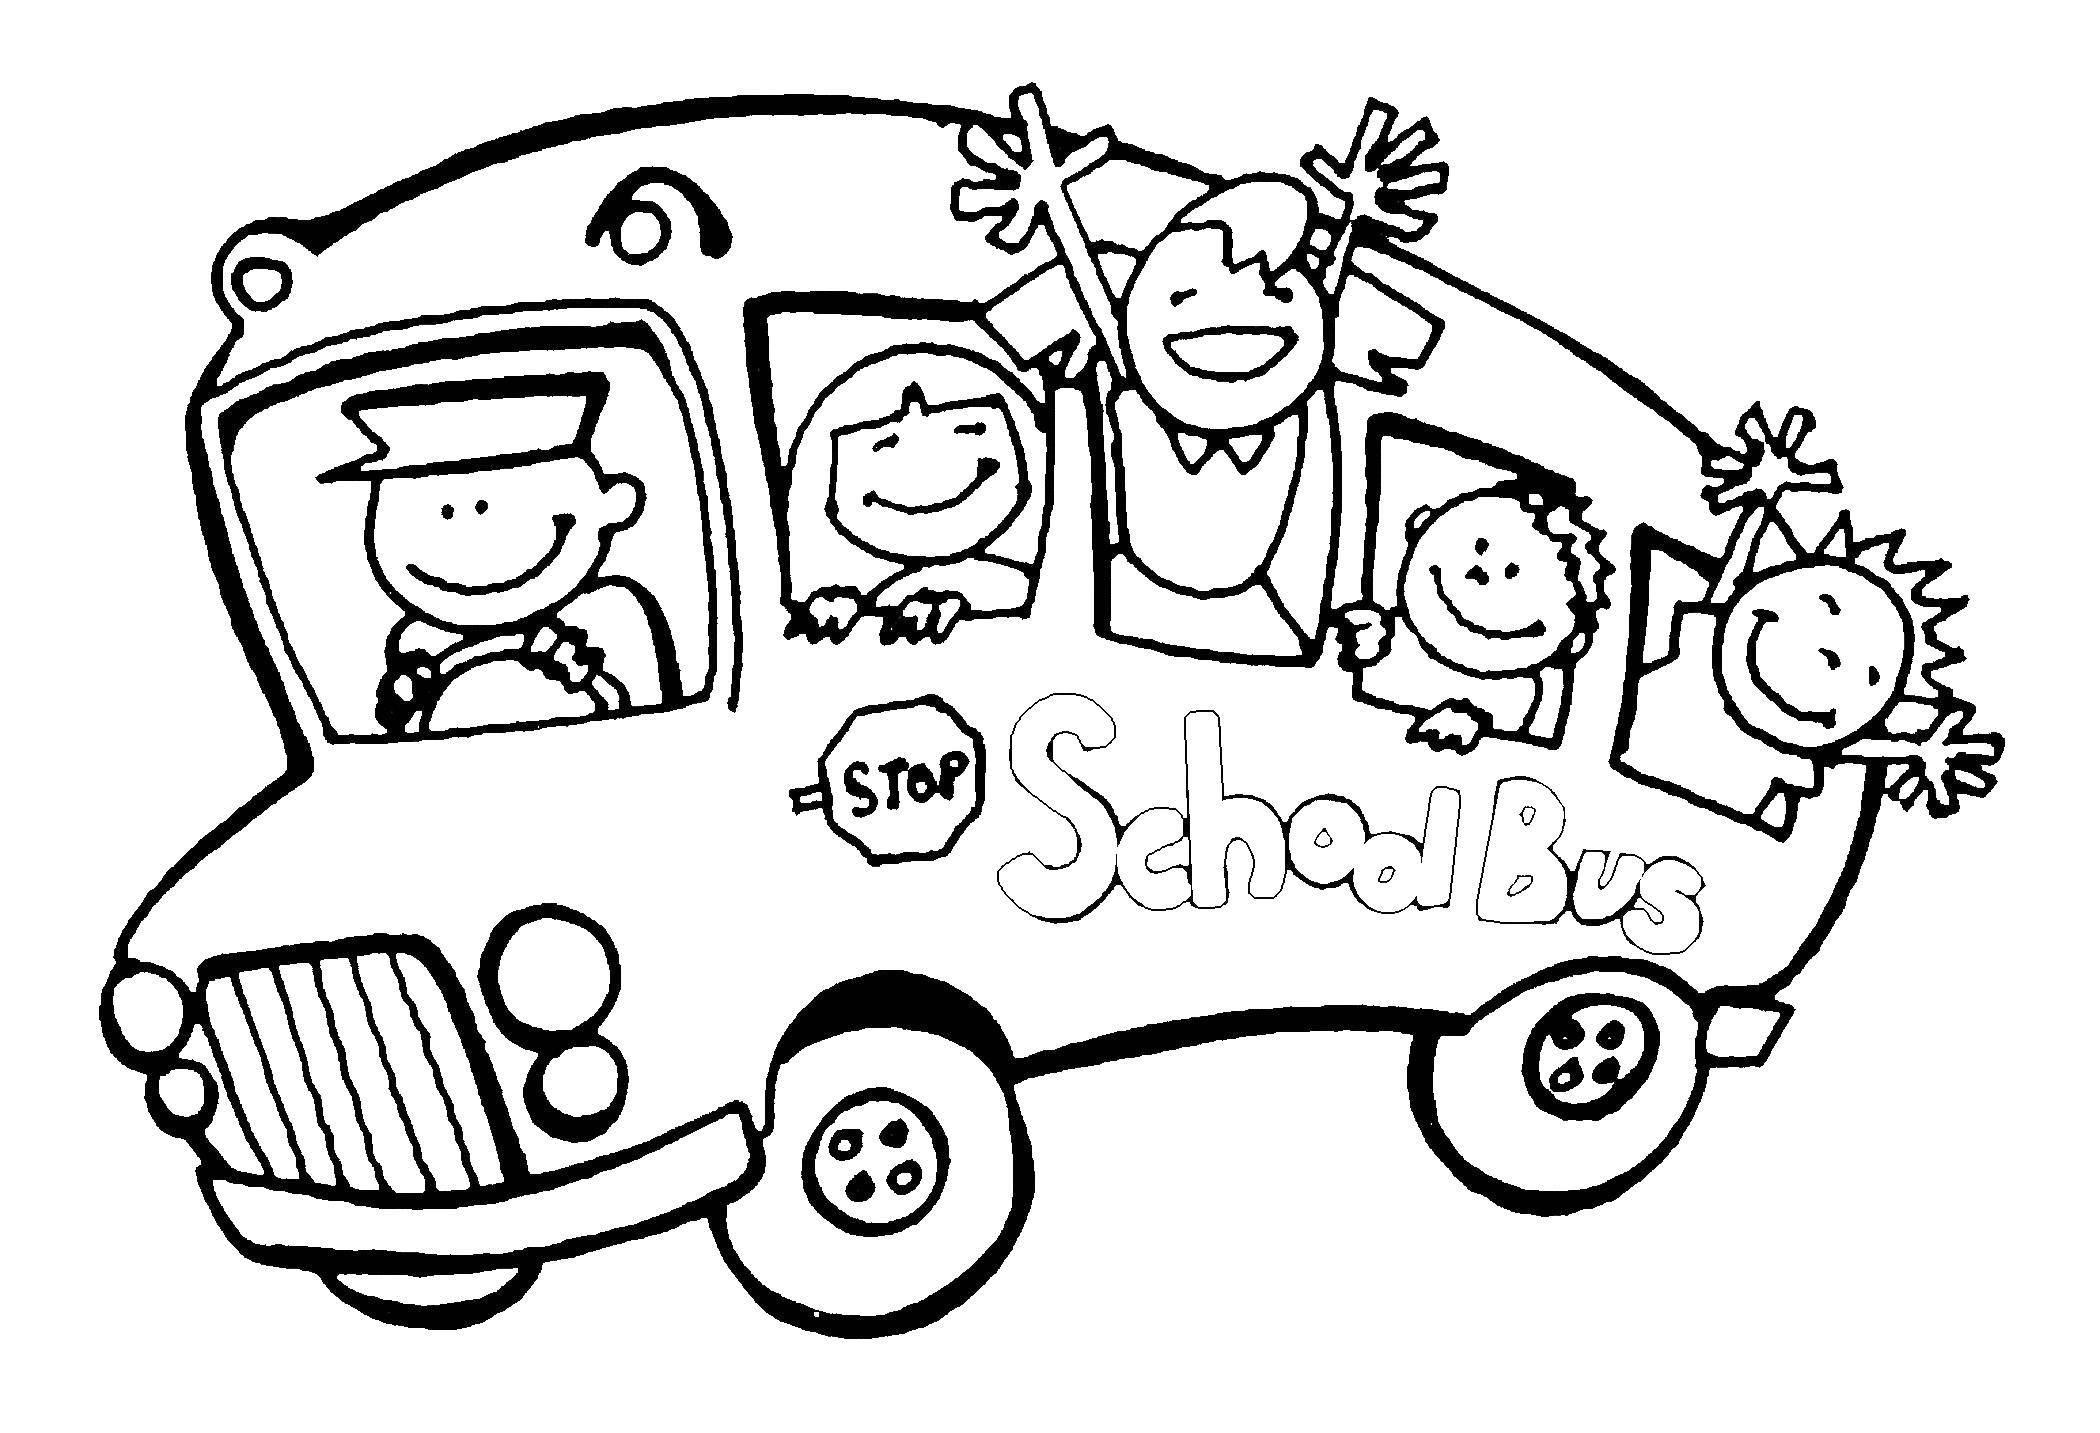 Coloring Children on the school bus. Category school. Tags:  School, bus, students.